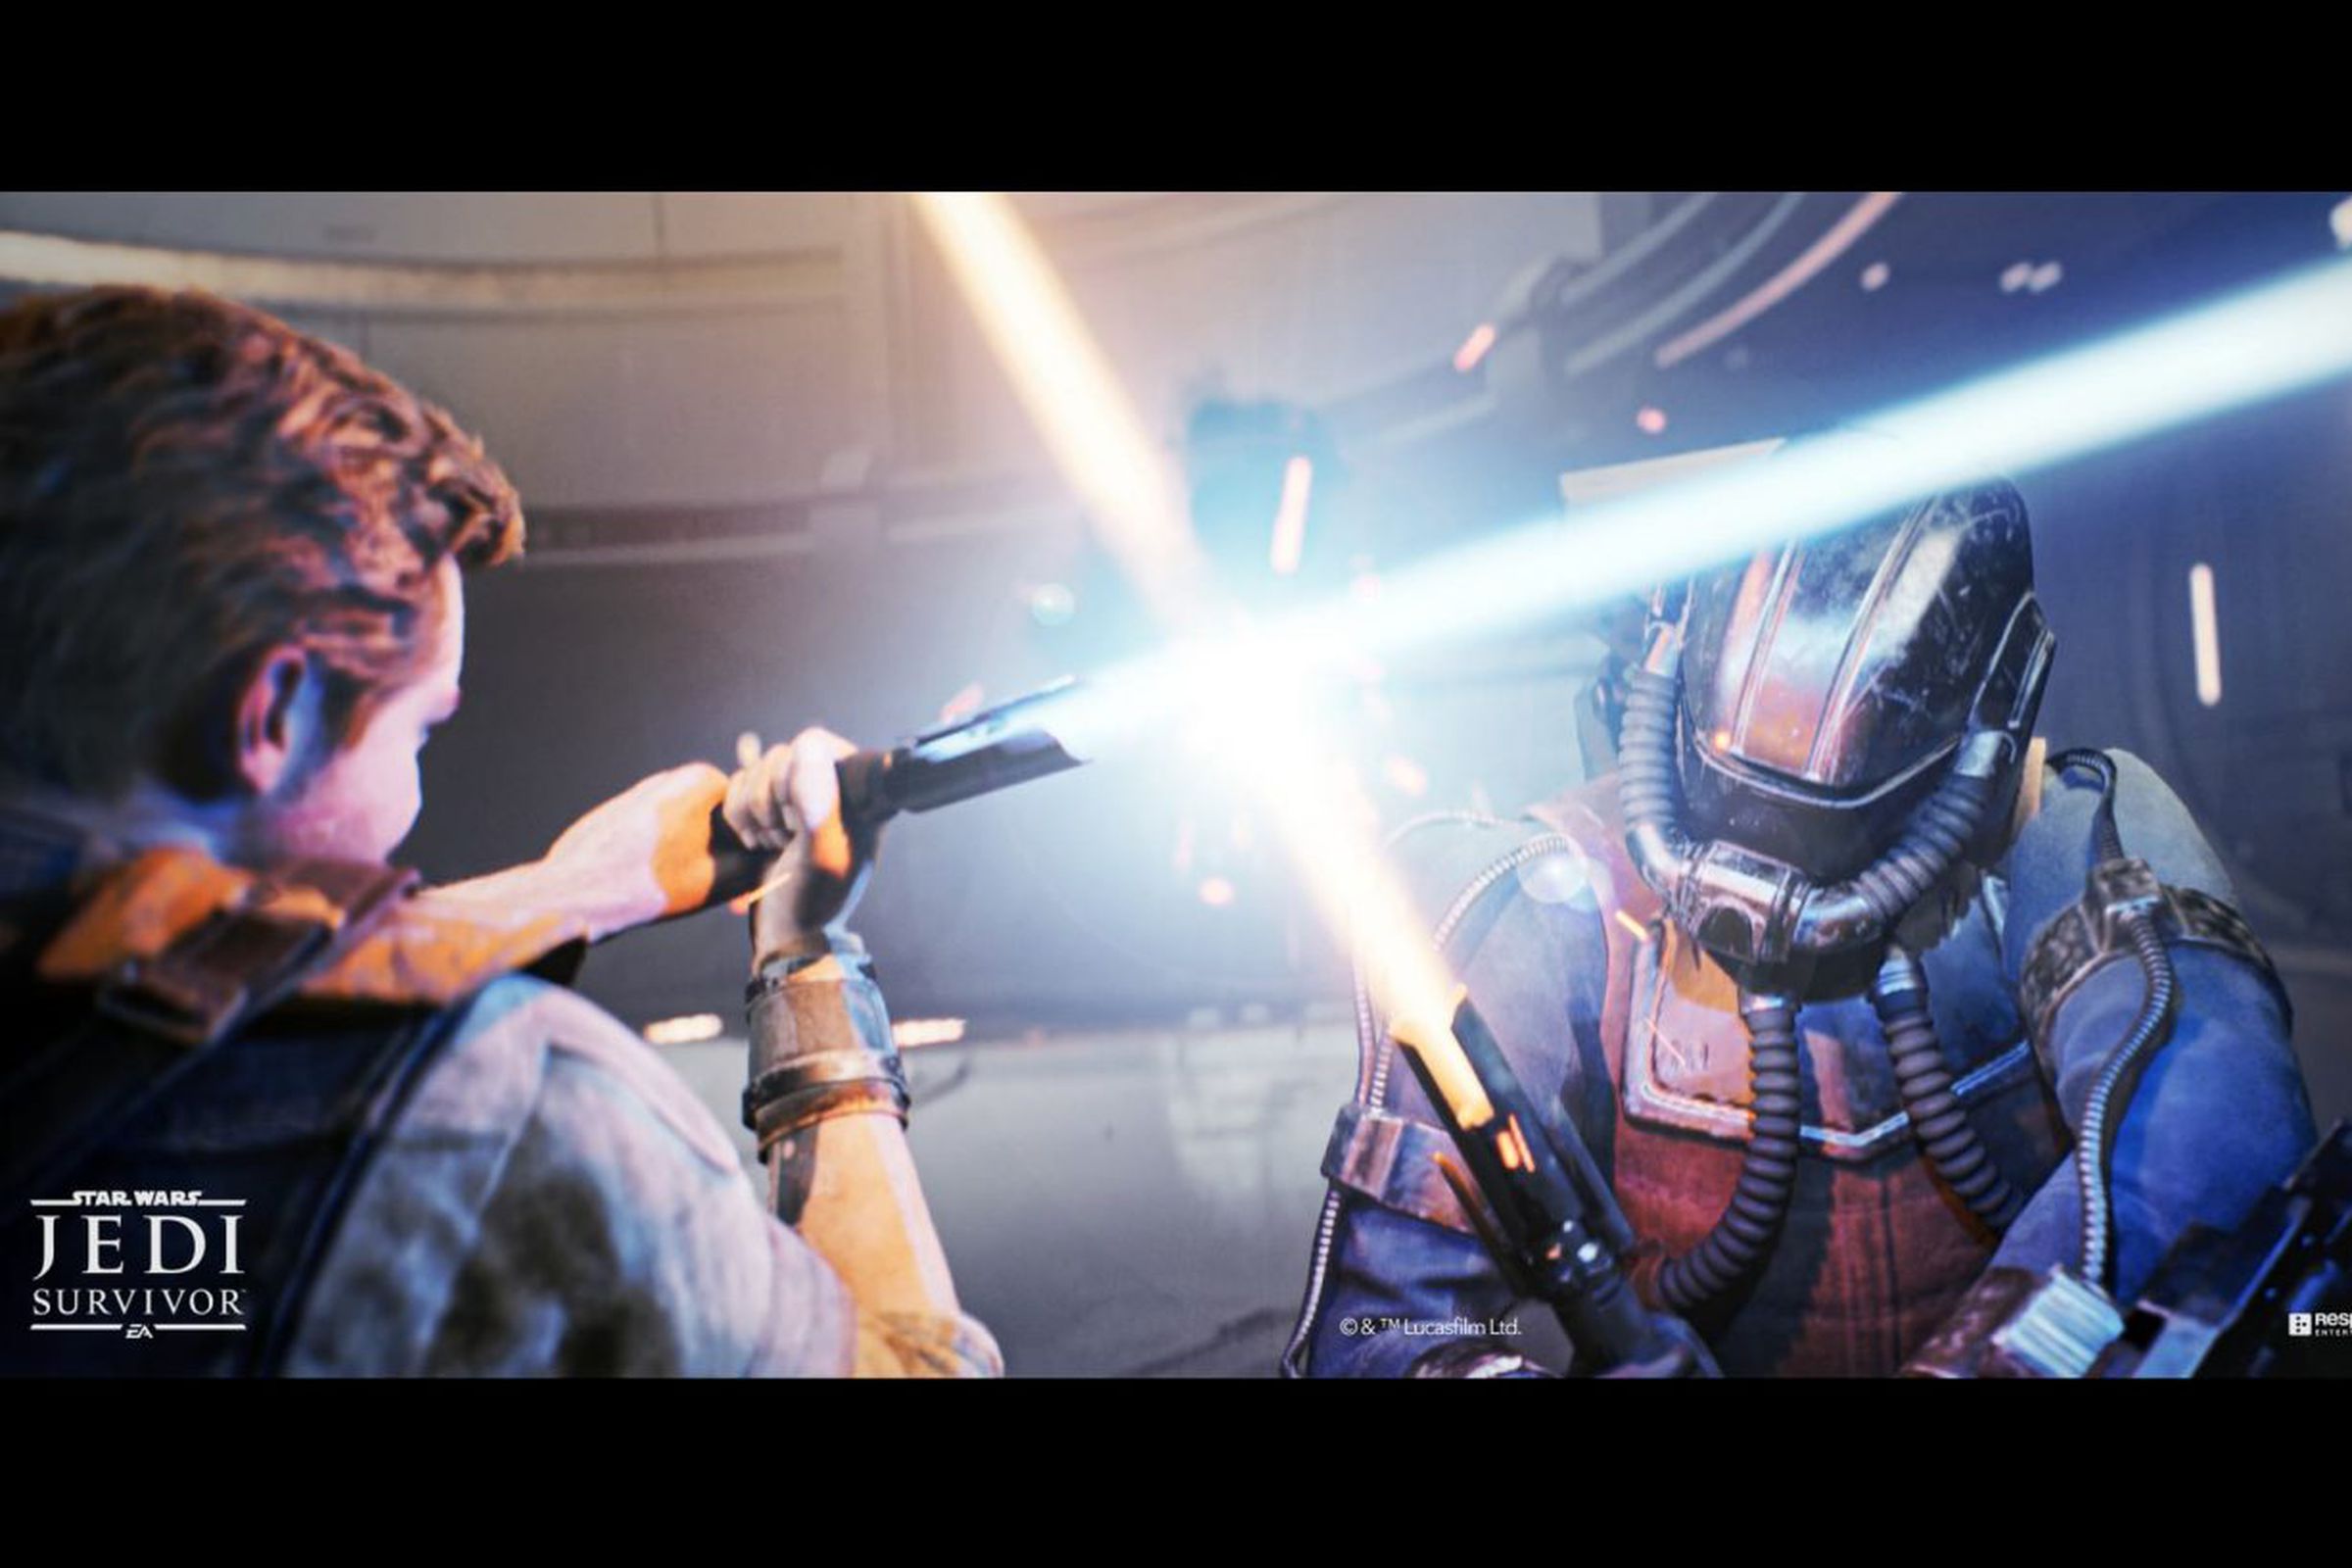 Screenshot from Star Wars Jedi: Survivor featuring a lightsaber duel between Cal Kestis and an unknown sith.